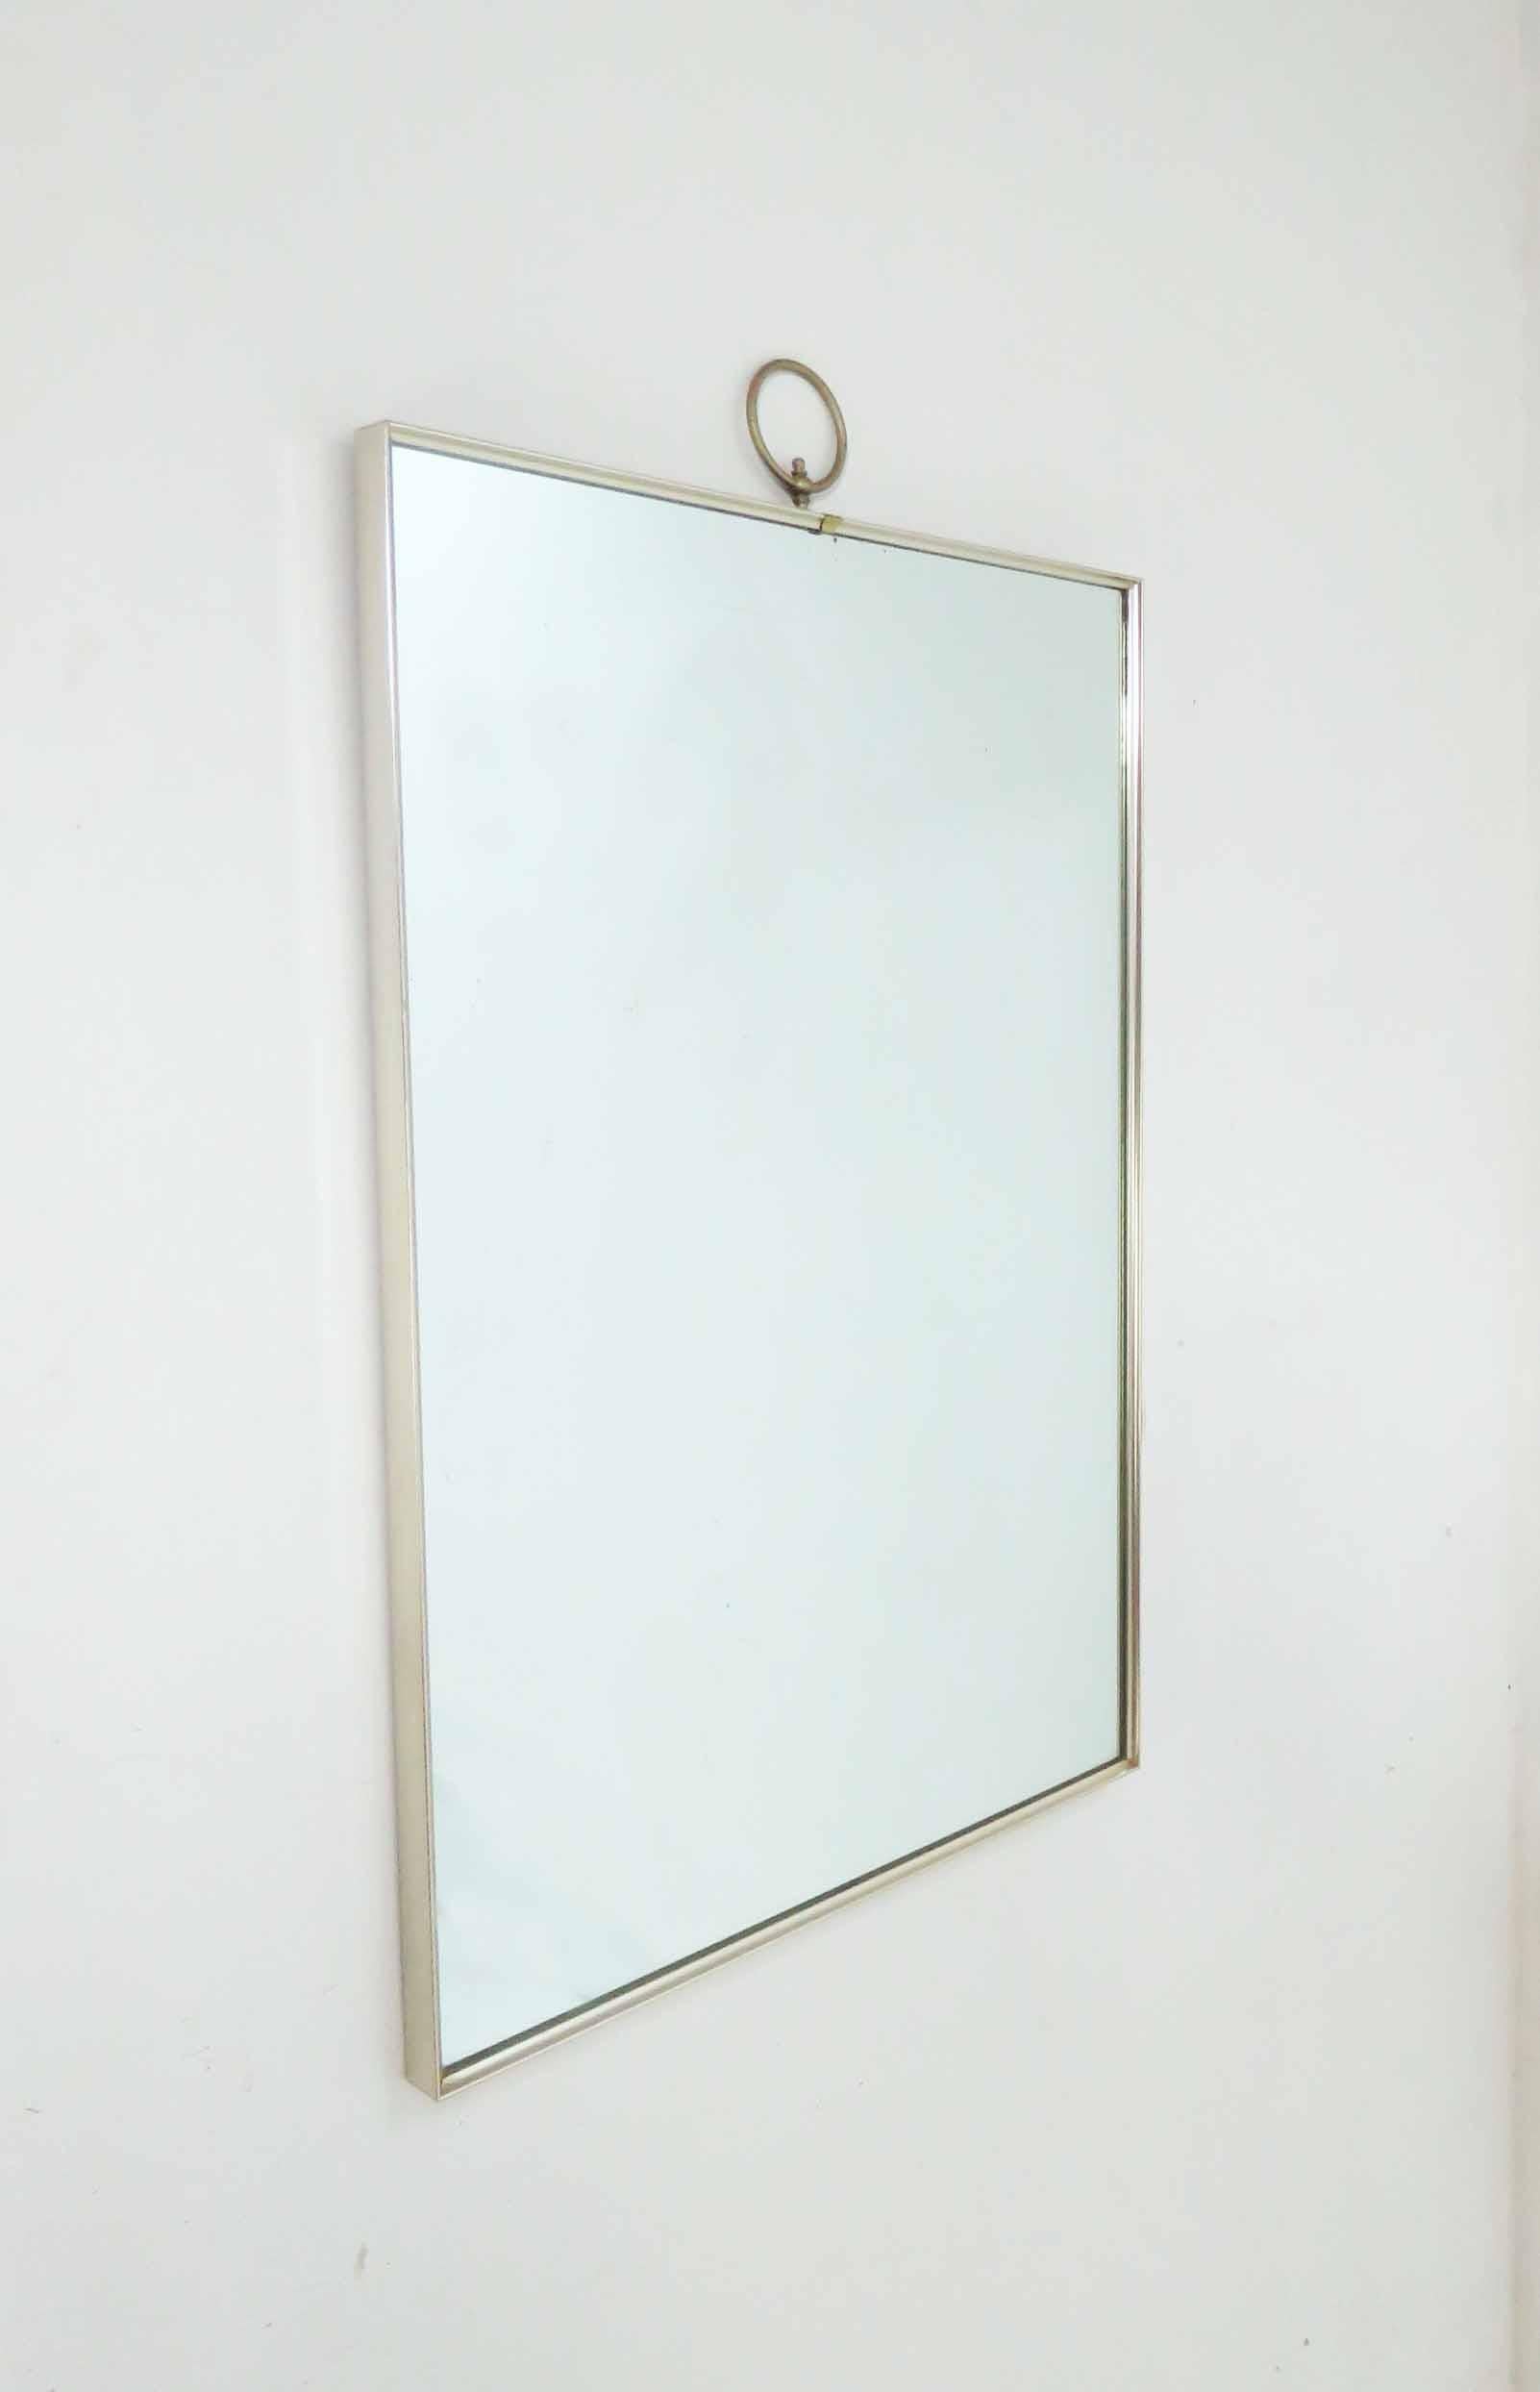 Striking modernist wall mirror in sleek anodized aluminum with ring finial, circa 1960s, by Turner.